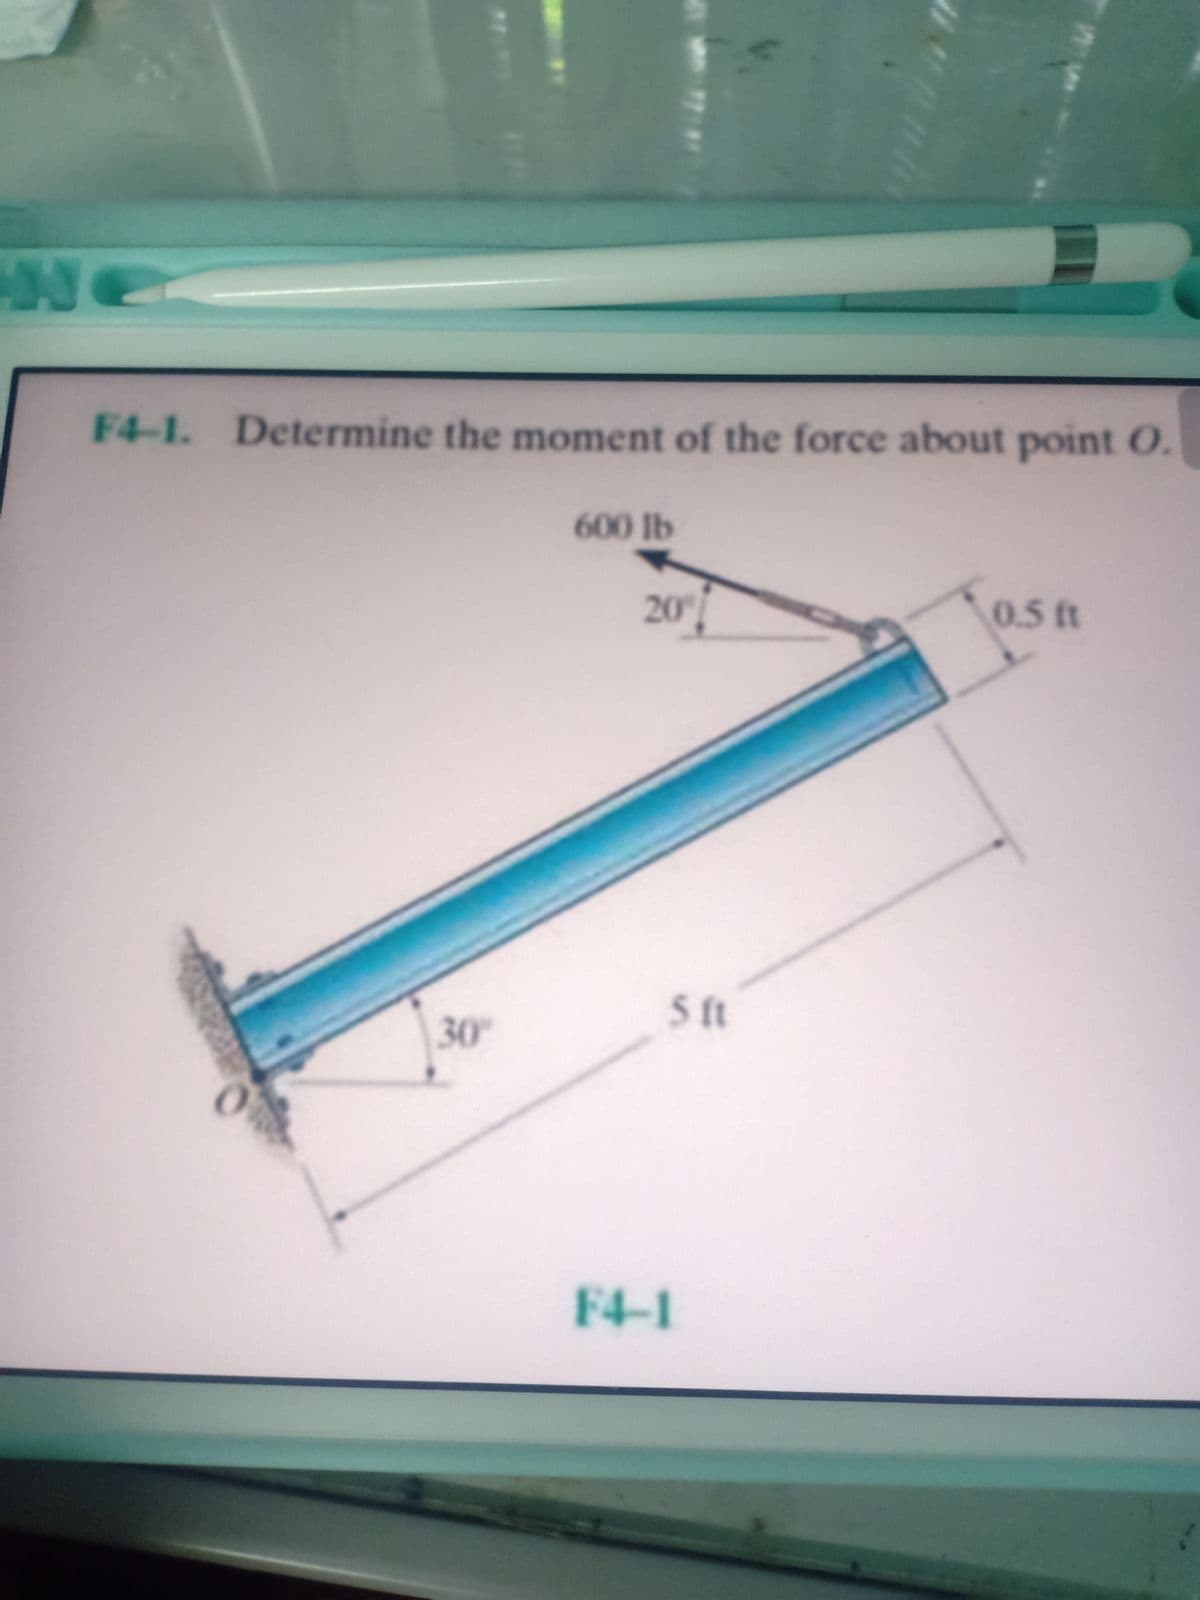 Ne
F4-1. Determine the moment of the force about point O.
600 lb
20°]
0.5 ft
5 t
30°
F4-1
